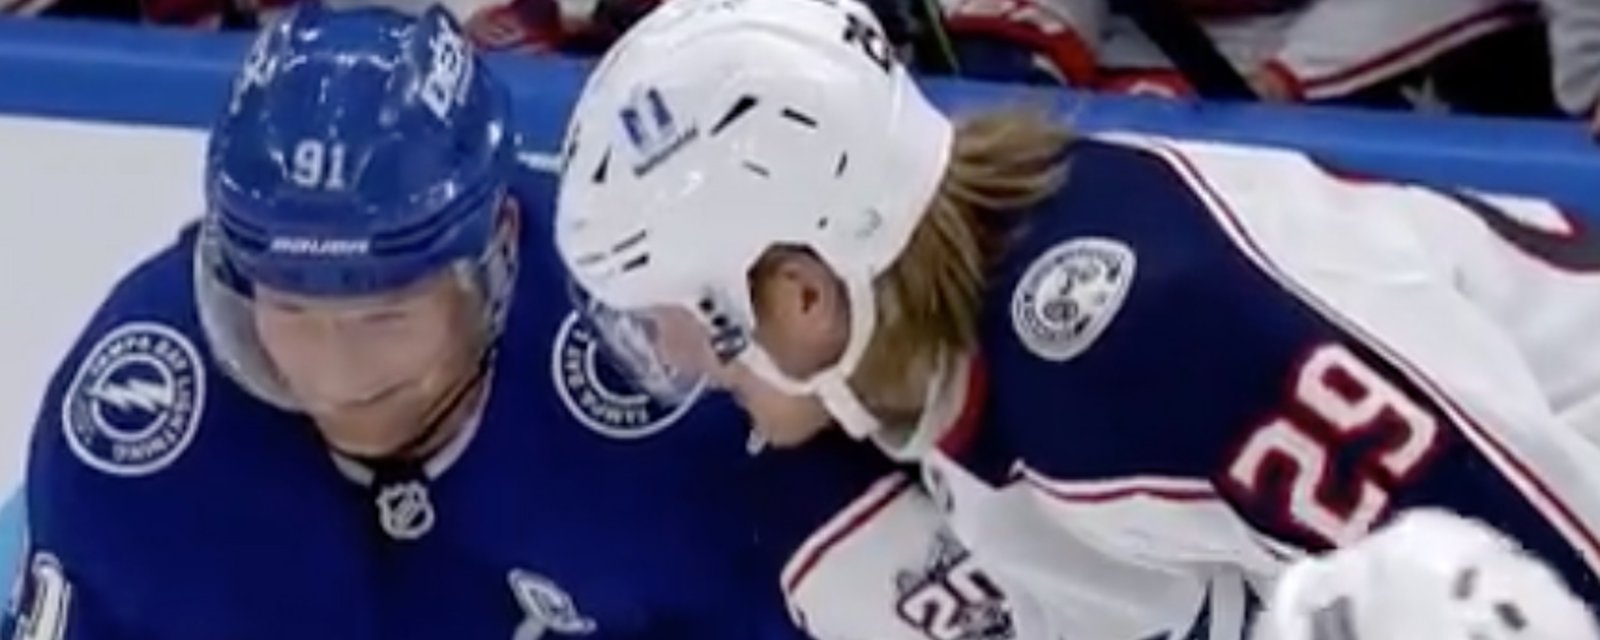 Patrik Laine caught chuckling on the ice with rival Steven Stamkos